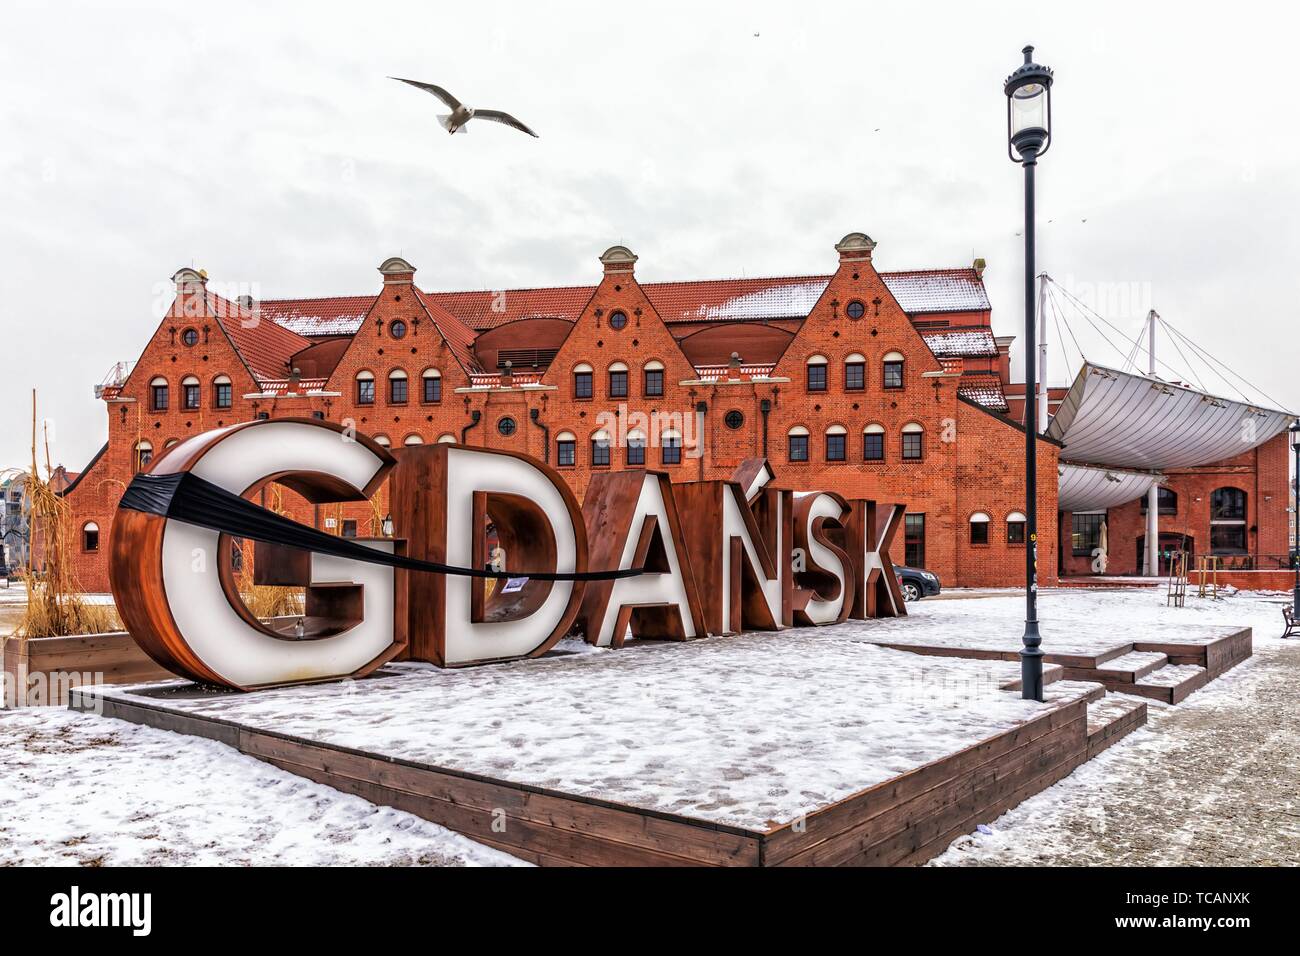 Gdansk,Poland - January 30, 2019: City sign with a mourning ribbon, winter view. Stock Photo